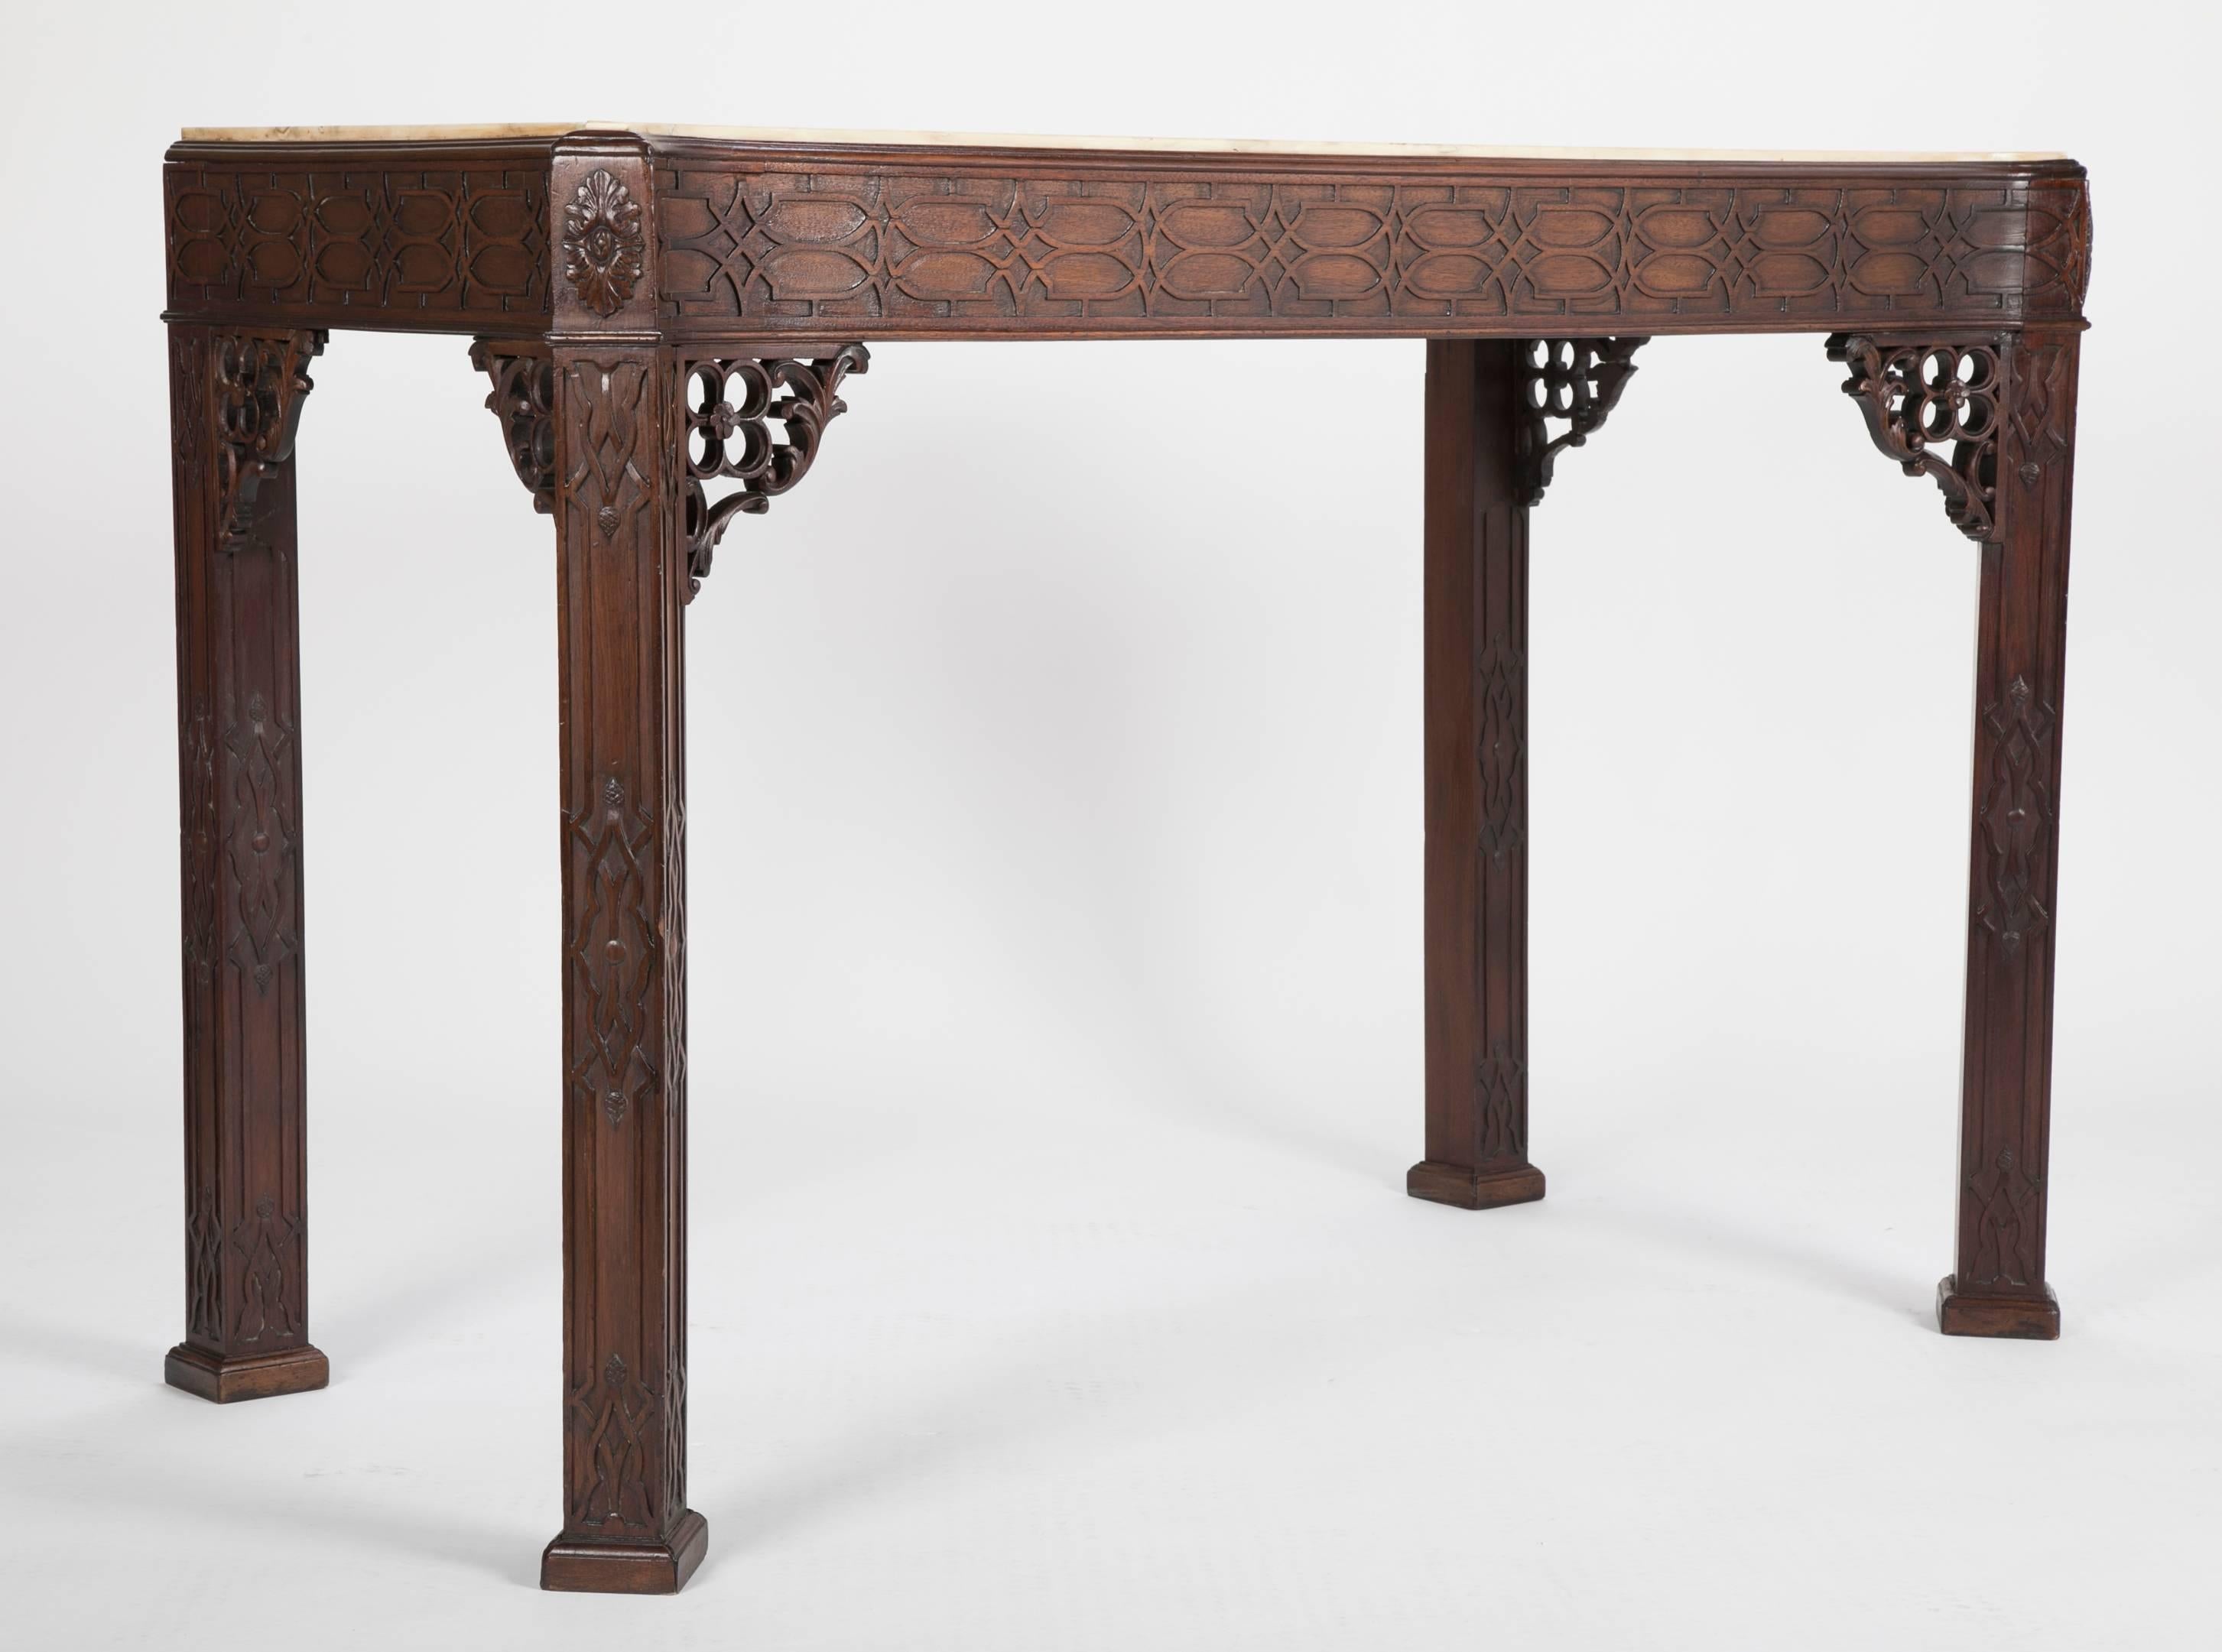 Late 19th century English console in the Chippendale style with marble top and black inlaid decoration. Heavily carved blind fretwork mahogany on bracketed columnar legs; the front legs presenting a broader apron give this console table an elegant